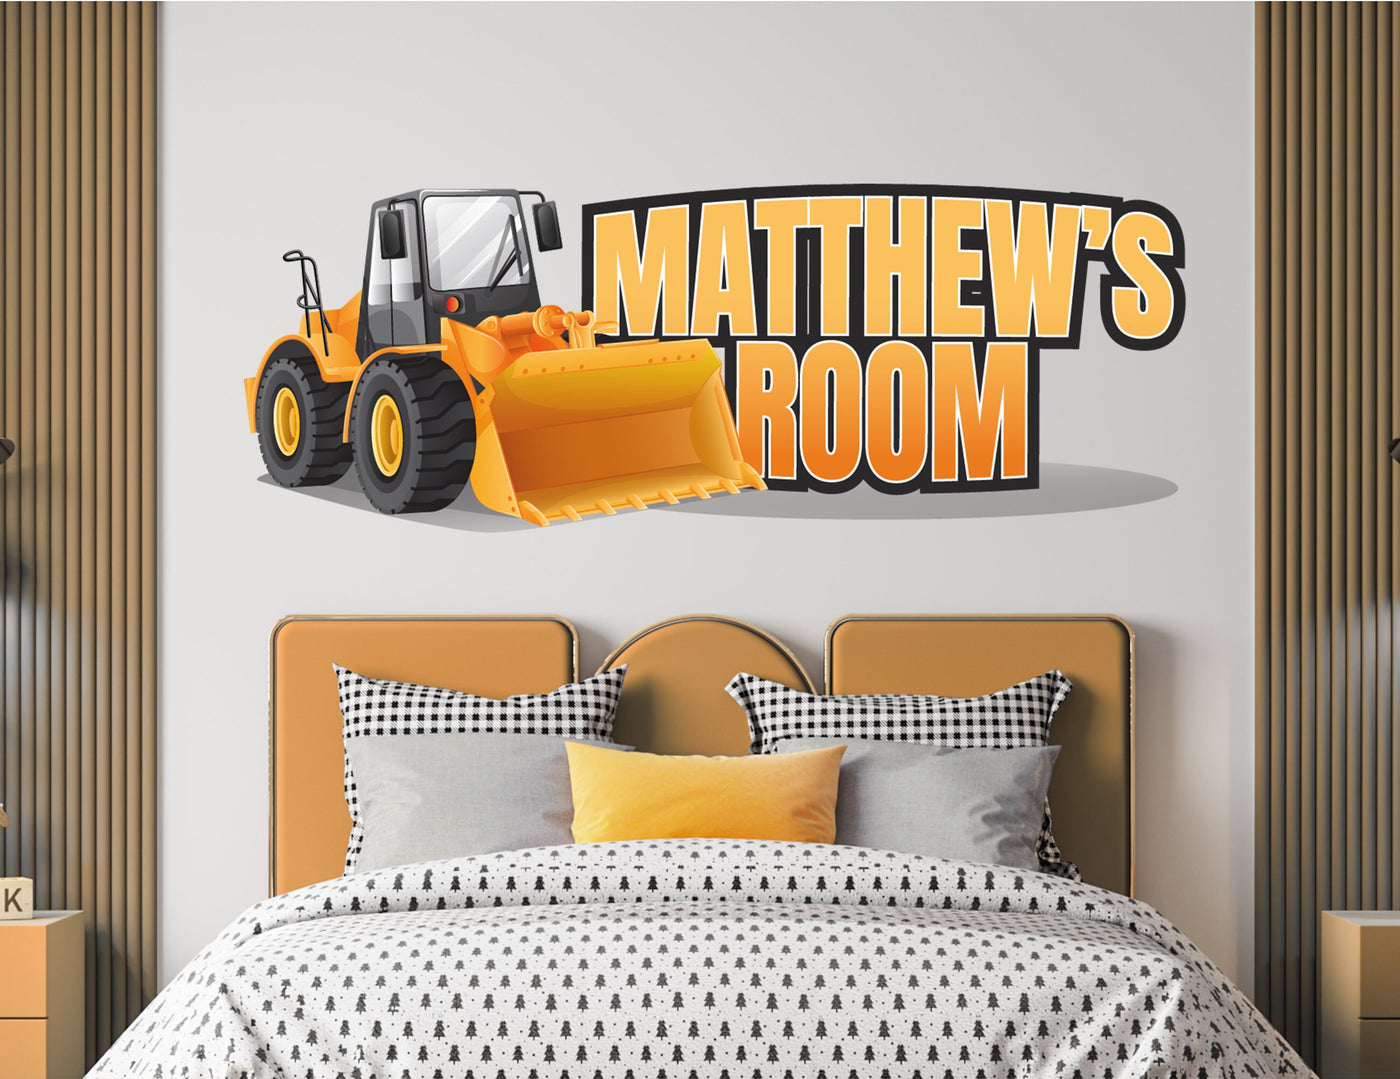 Contruction Name Stickers for Kids Personalized - Bobcat Name Wall Decals for Boys Bedroom